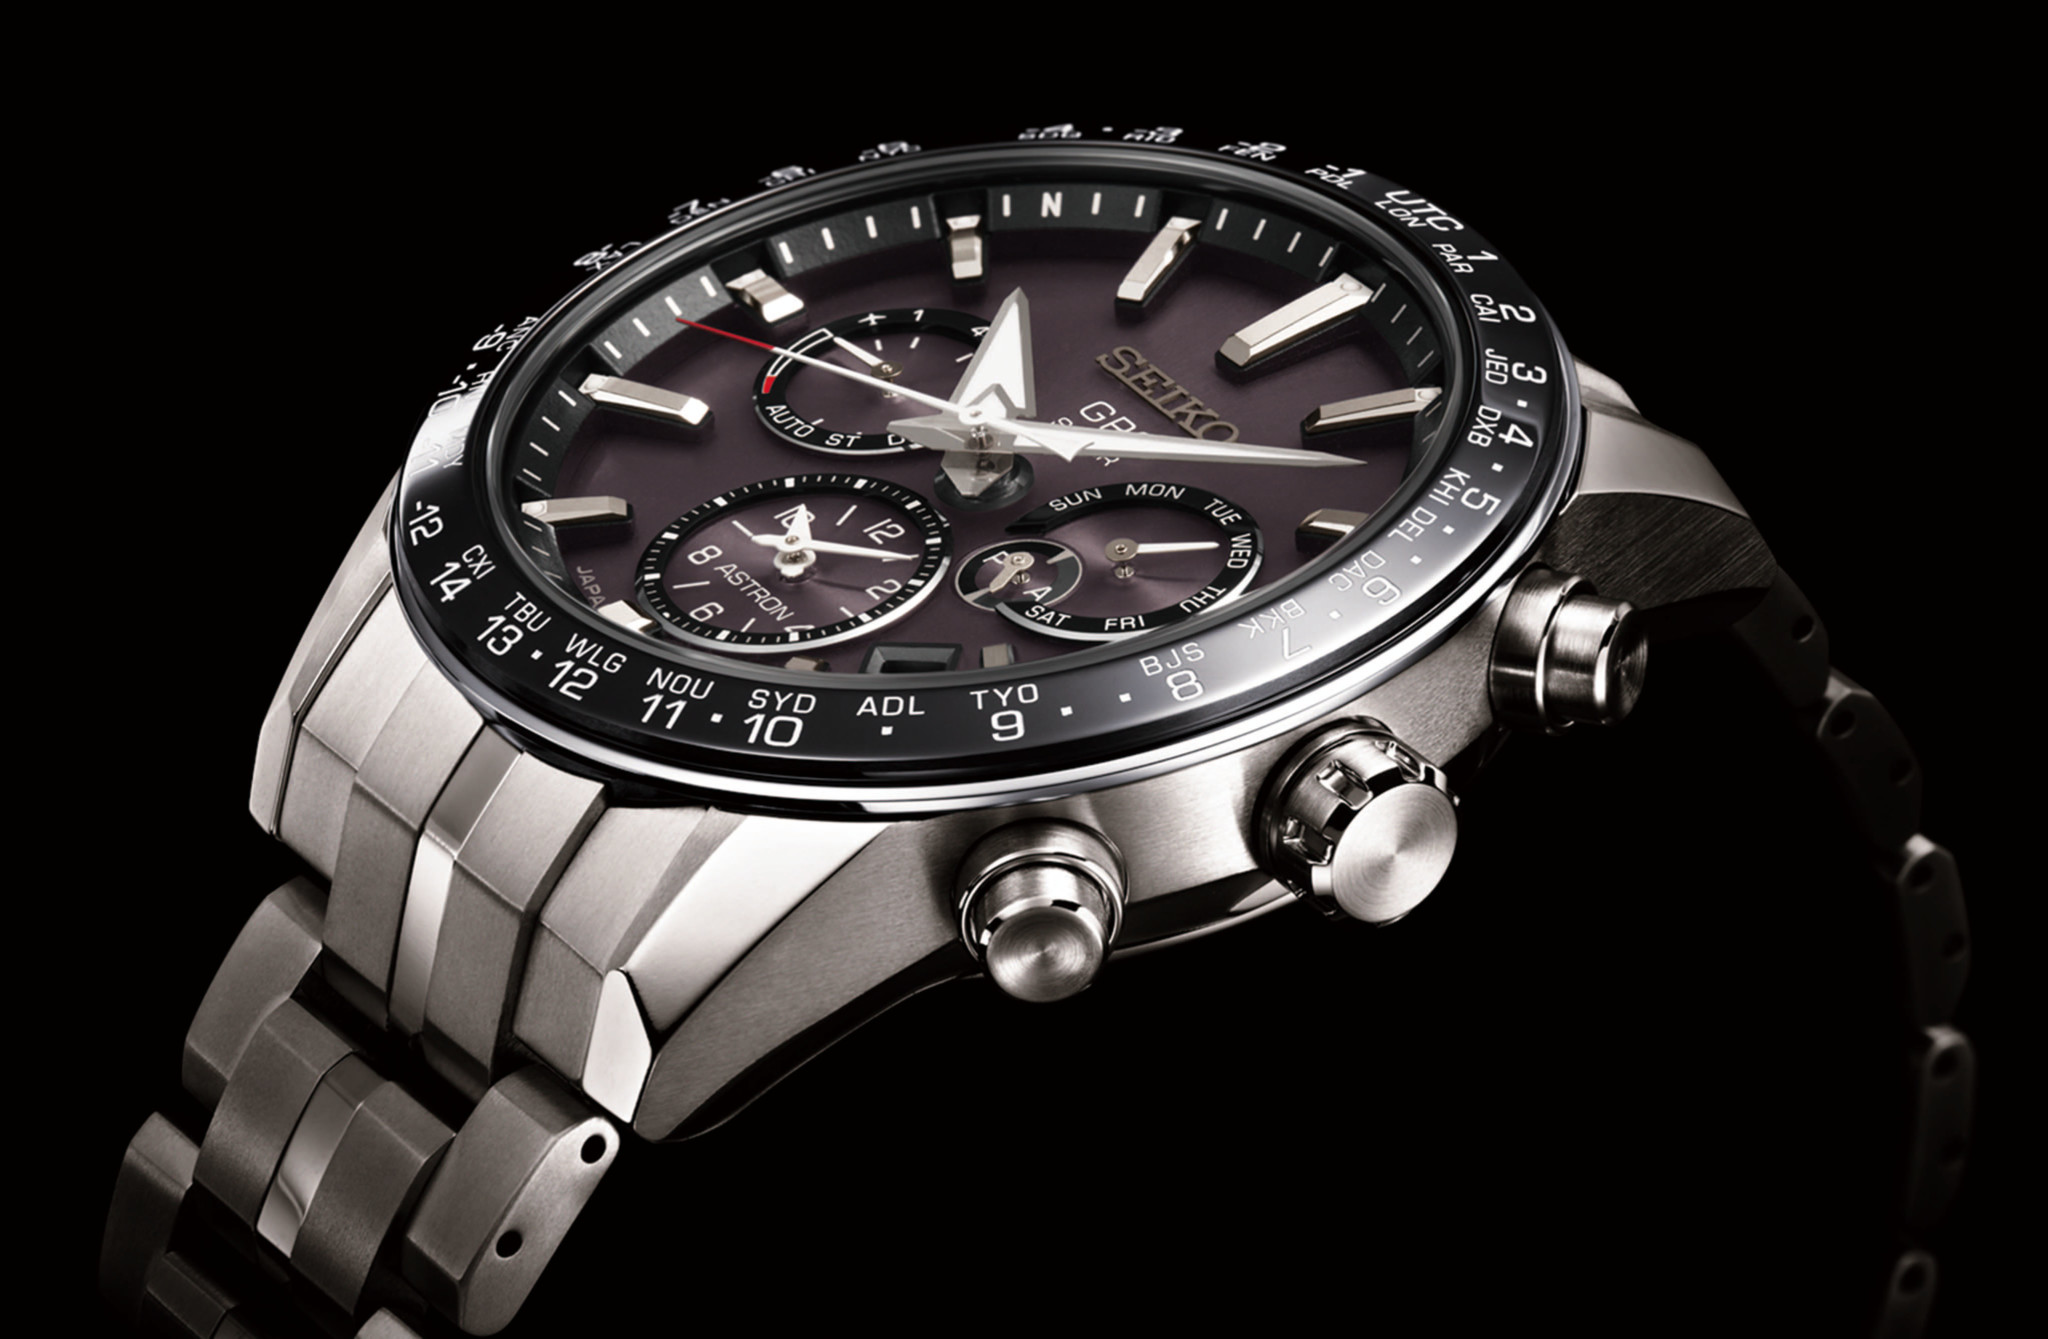 Seiko produces slimmest collection Astron GPS Solar watches